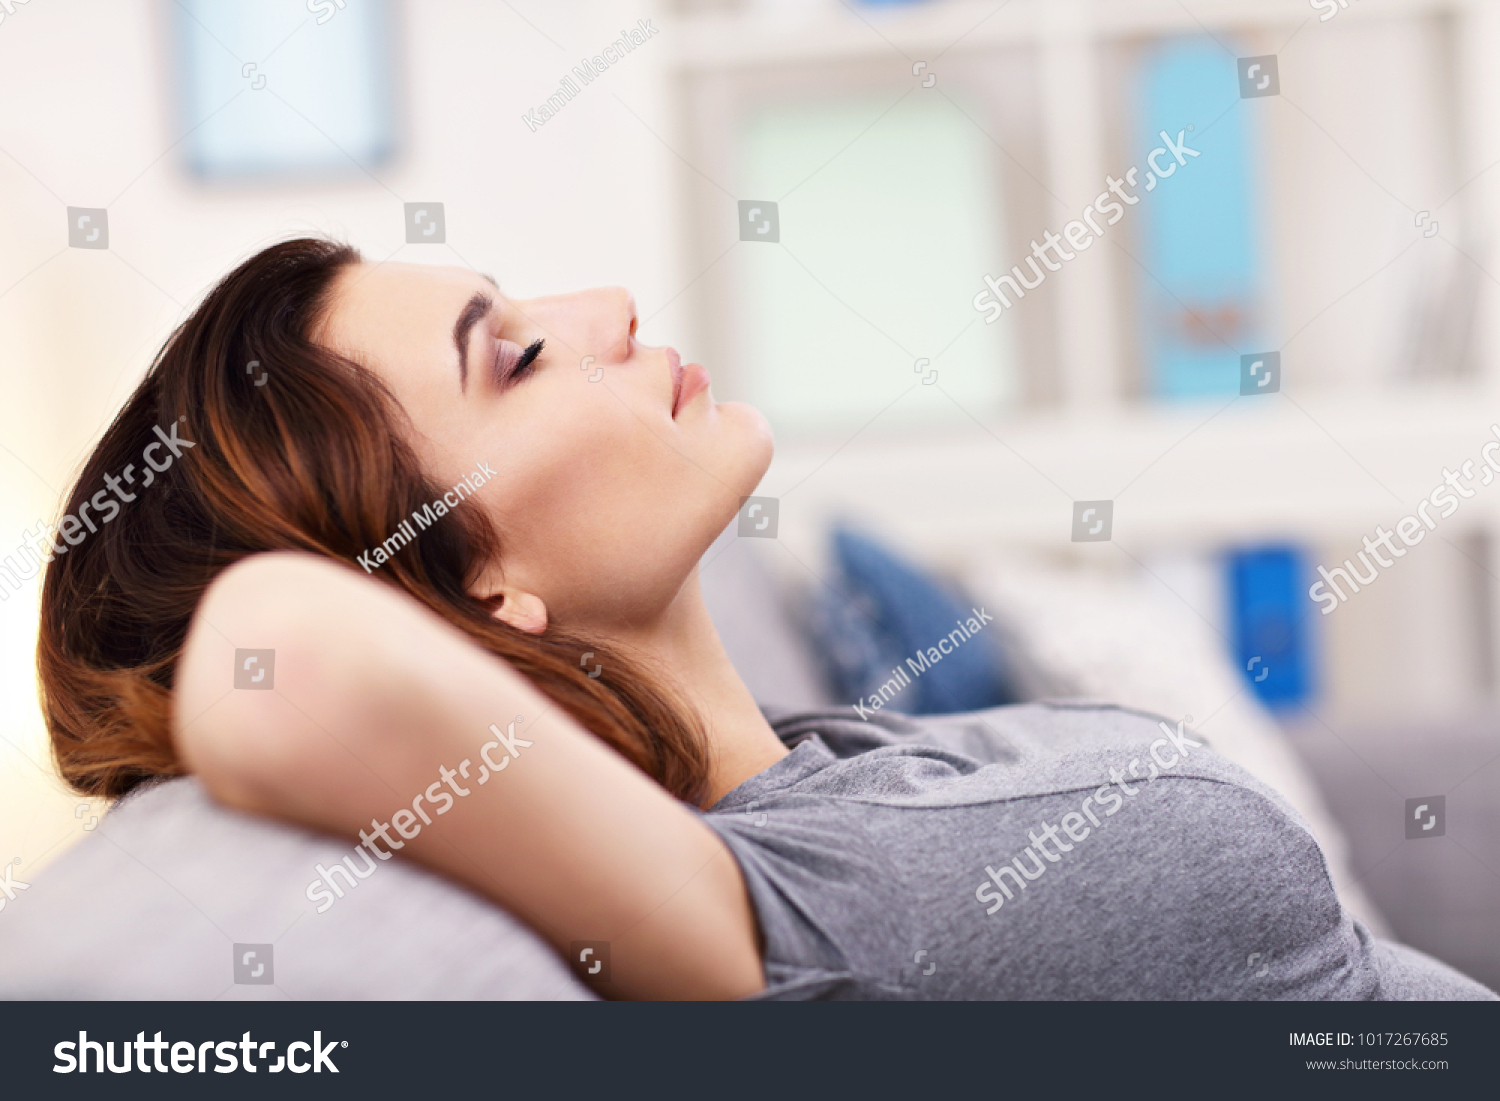 Picture of relaxed young woman enjoying rest on comfortable sofa #1017267685